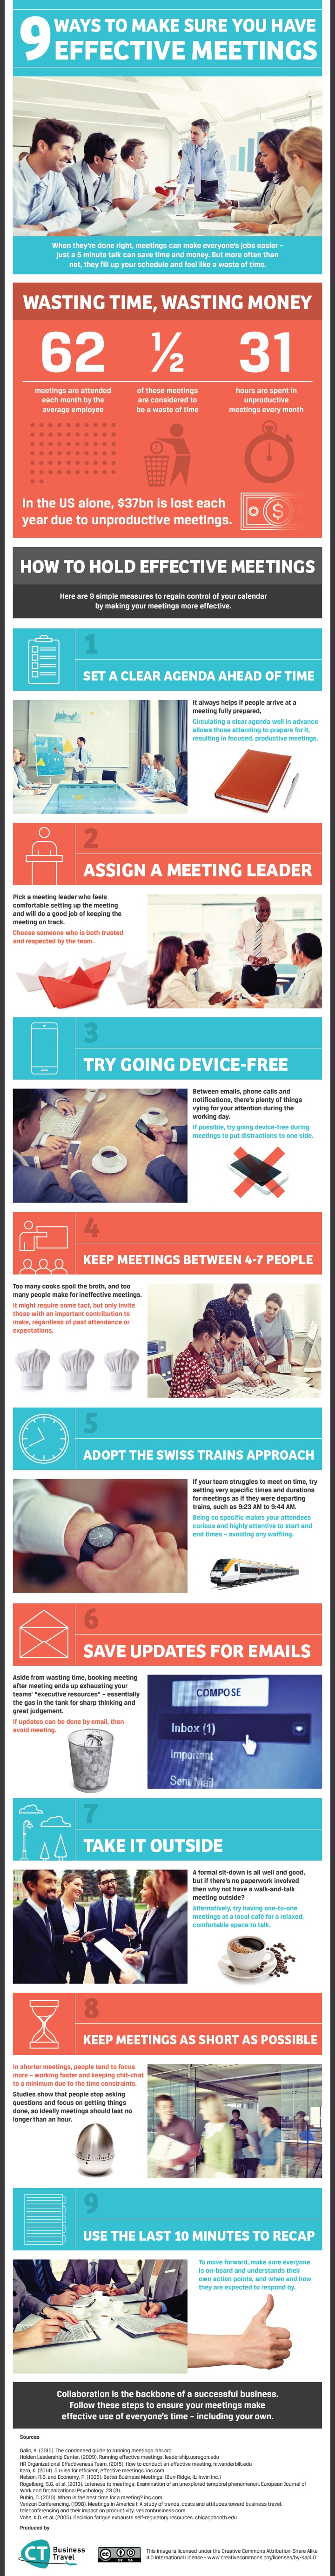 organize effective meetings infographic